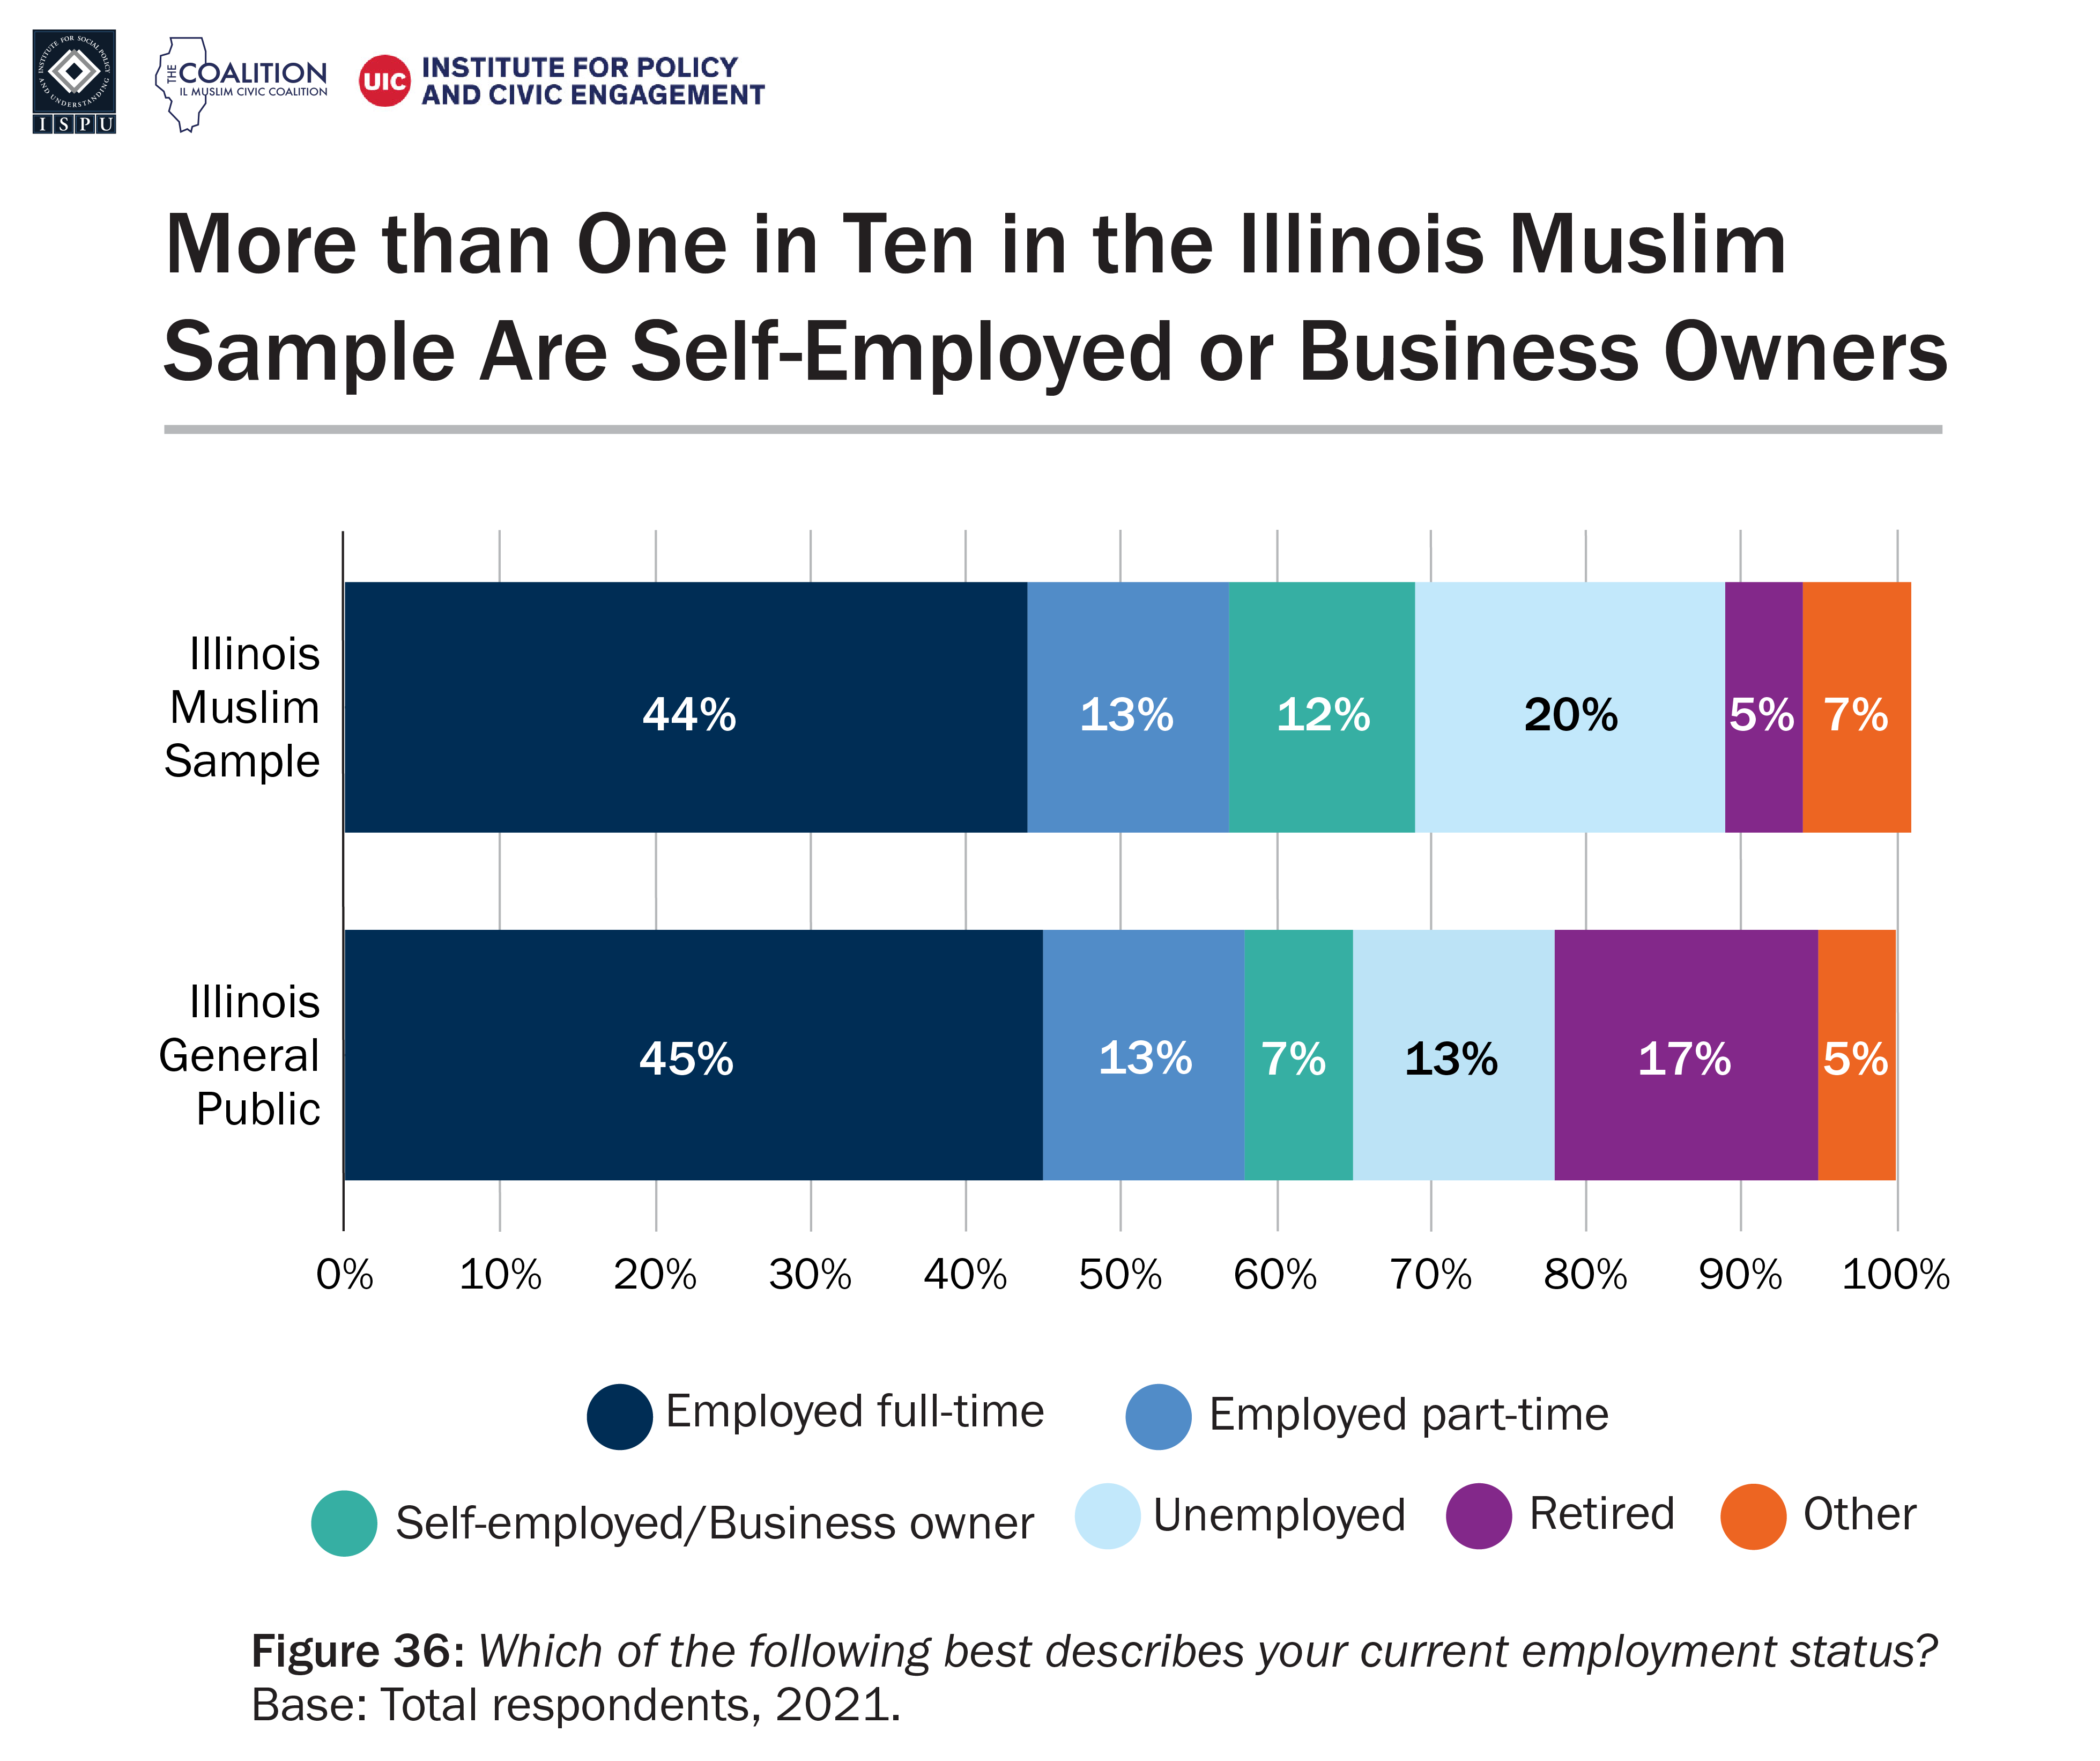 A bar graph showing employment status among the Illinois Muslim sample and Illinois general public